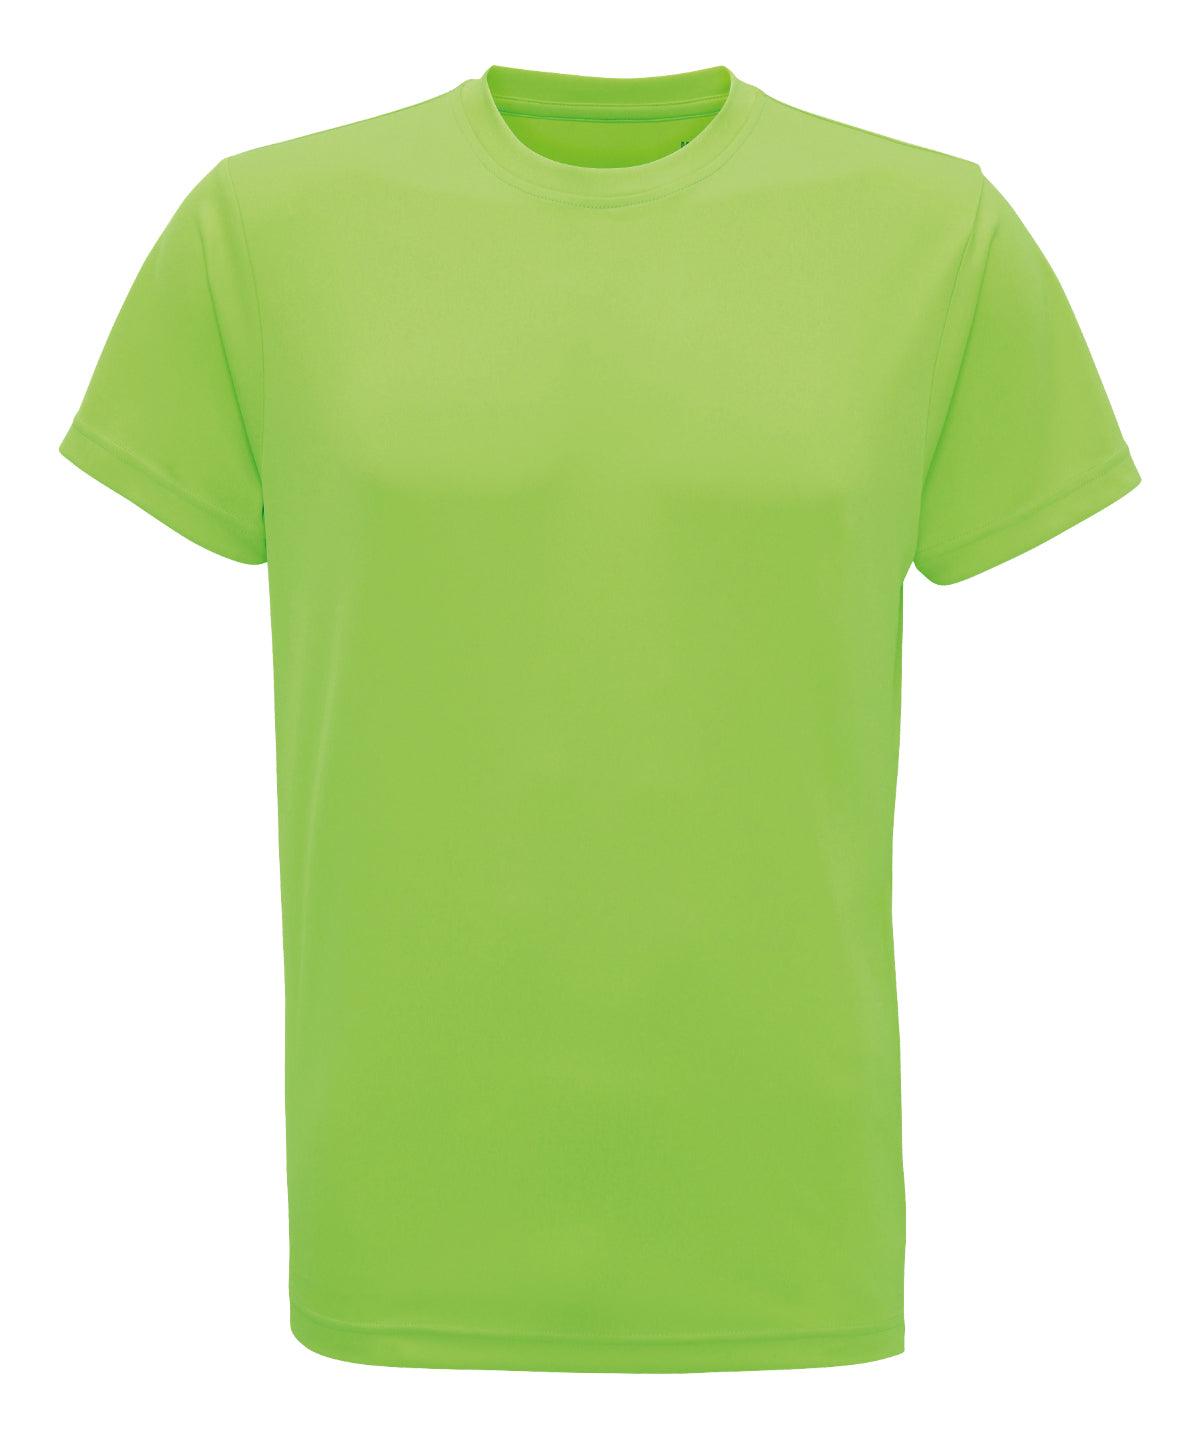 Lightning Green - TriDri® recycled performance t-shirt T-Shirts TriDri® Activewear & Performance, Back to the Gym, Exclusives, New Styles For 2022, Organic & Conscious, T-Shirts & Vests Schoolwear Centres